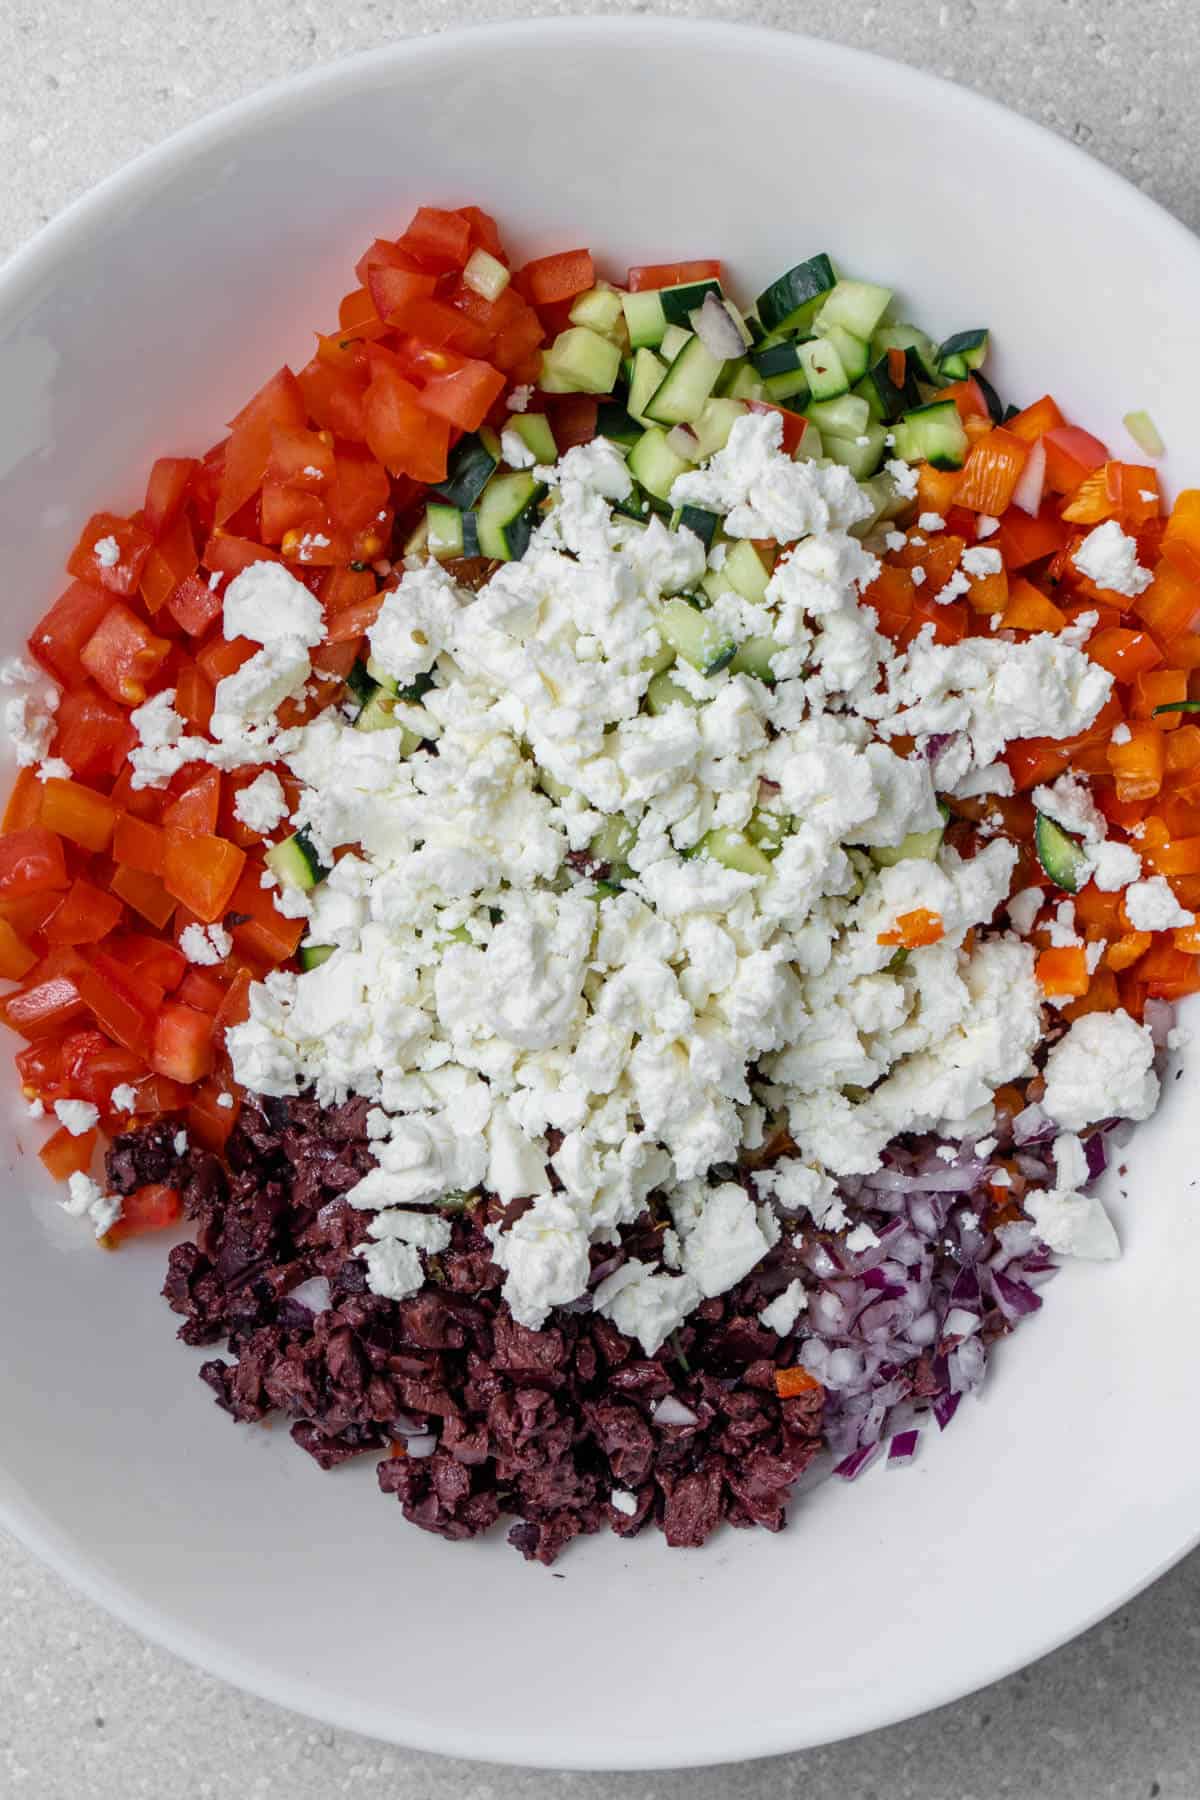 Chopped veggie ingredients with crumbled feta before being mixed